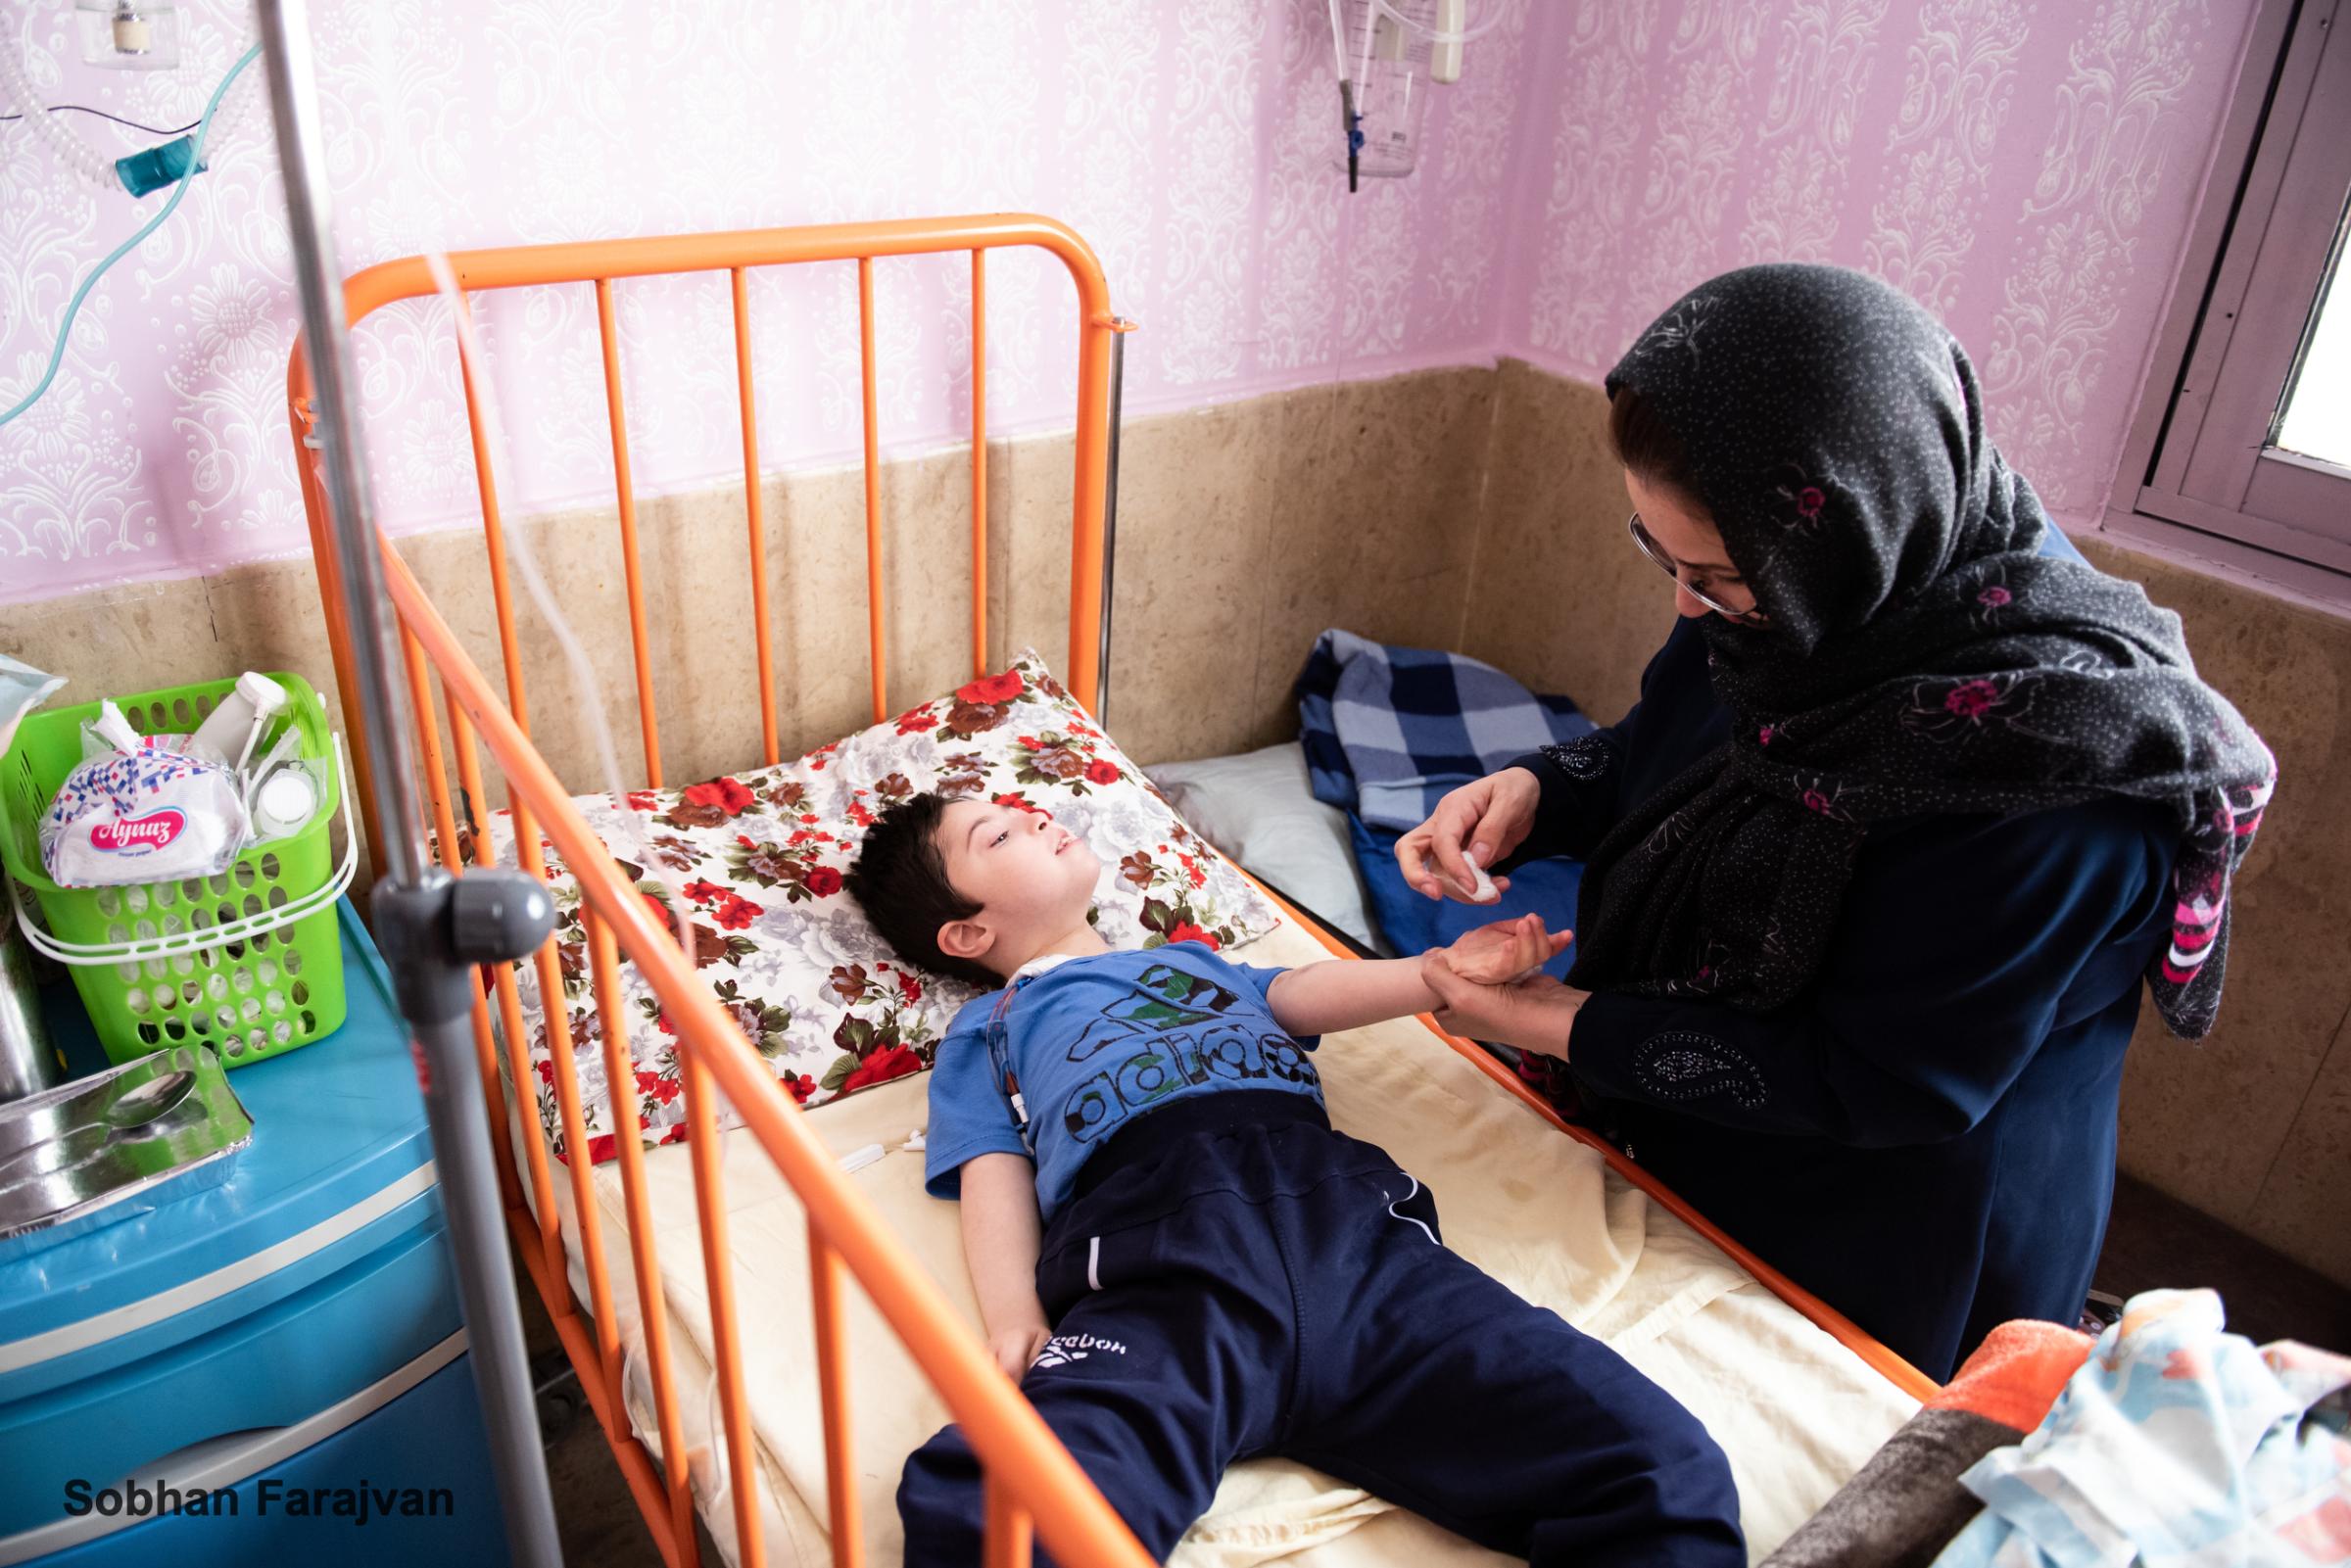 COVID-19 pandemic in Iran (2020-2022) - An Iranian mother takes care of her 9-year-old autistic...